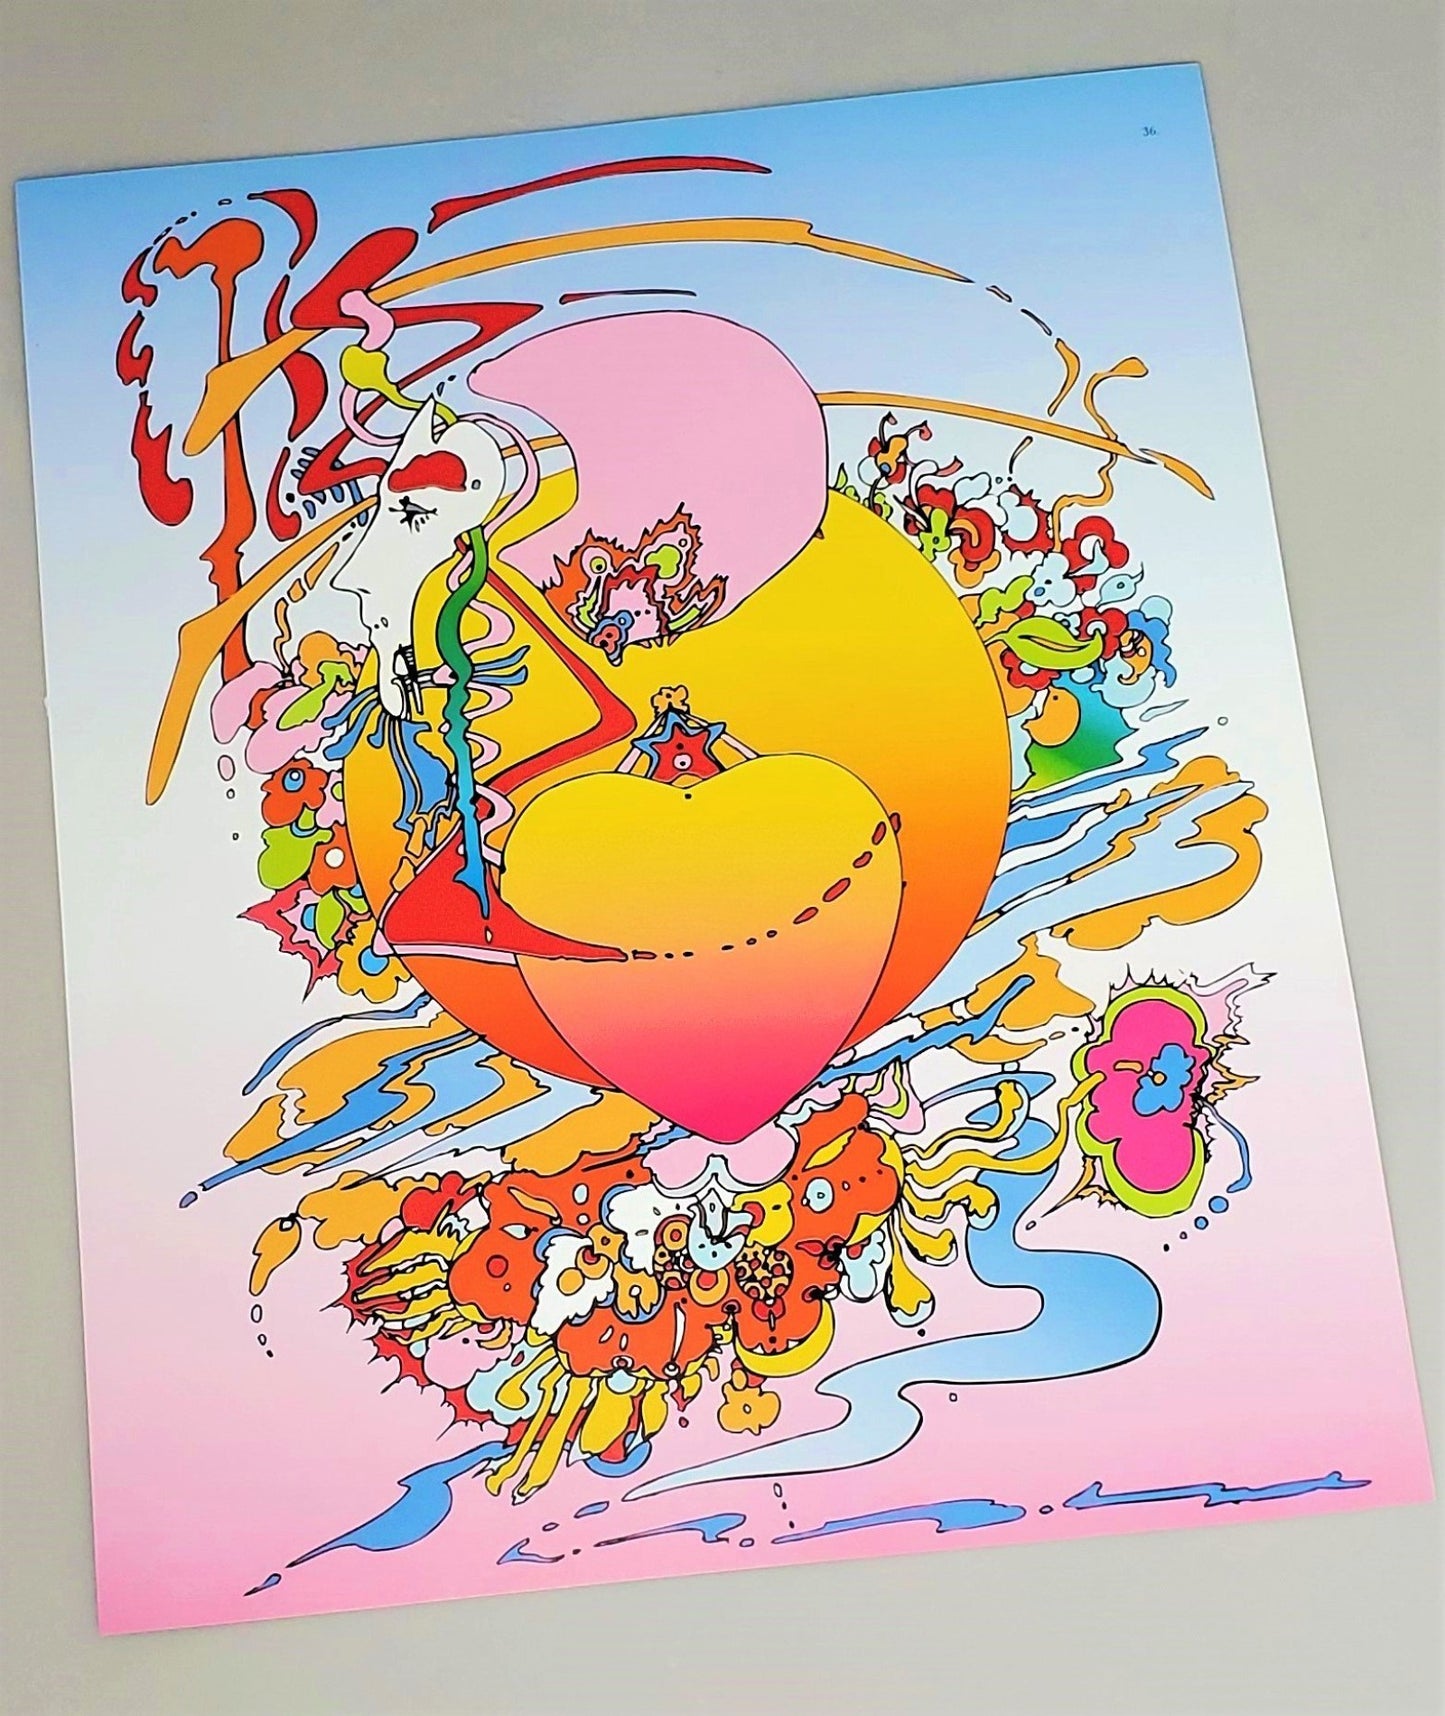 Orange Heart featured in The Art Of Peter Max 2002 edition hardcover book